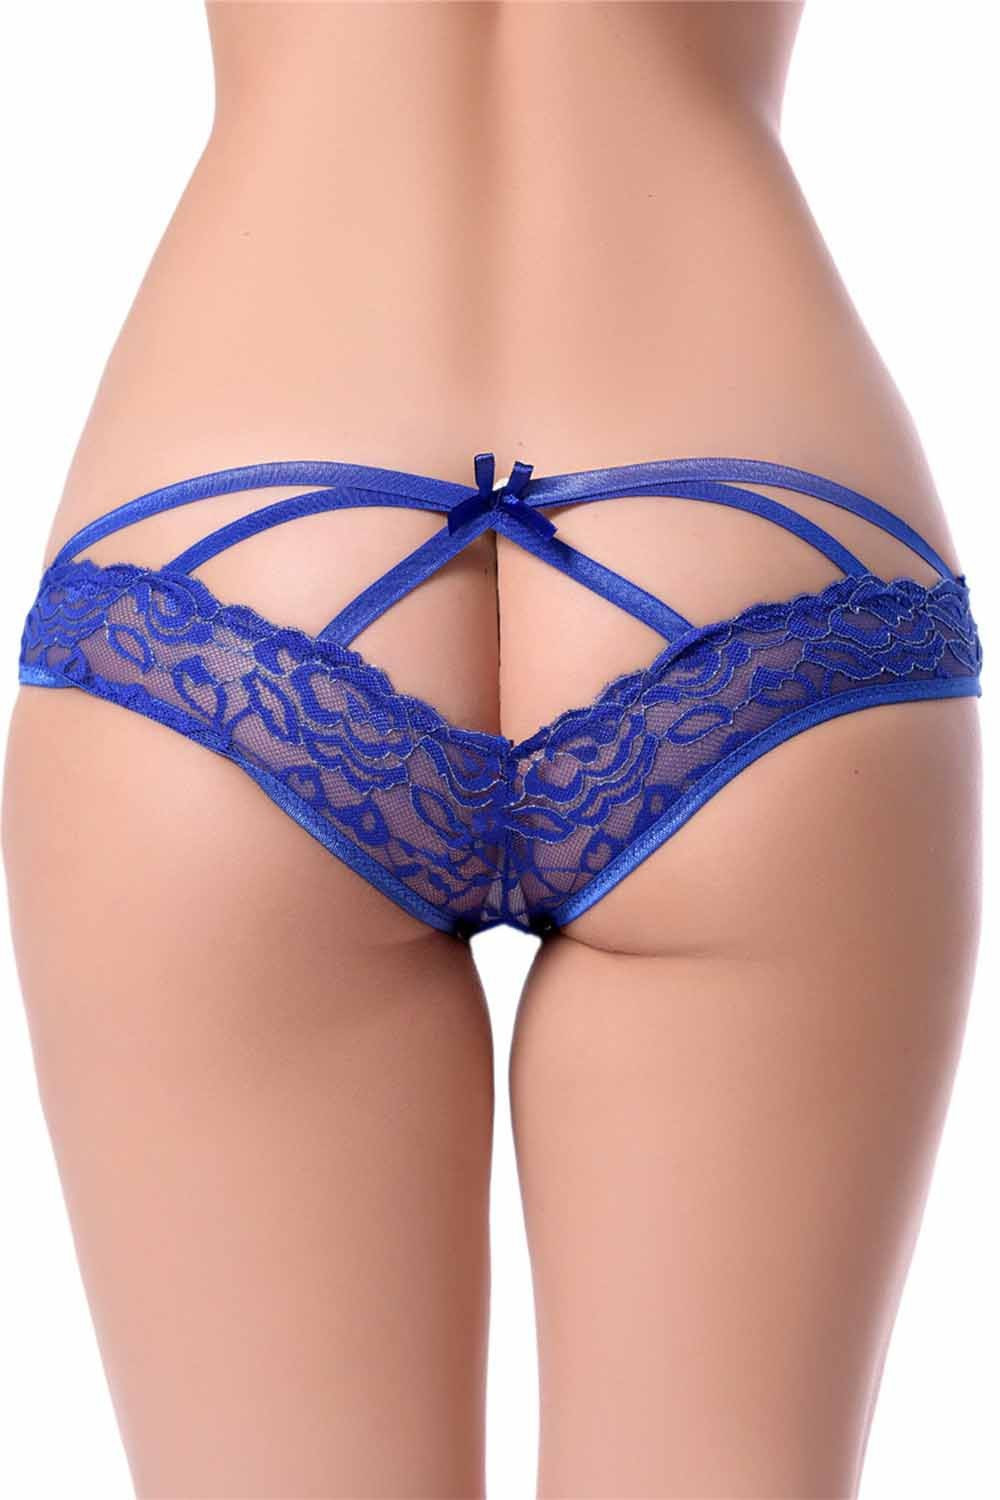 Sexy blue lace panties